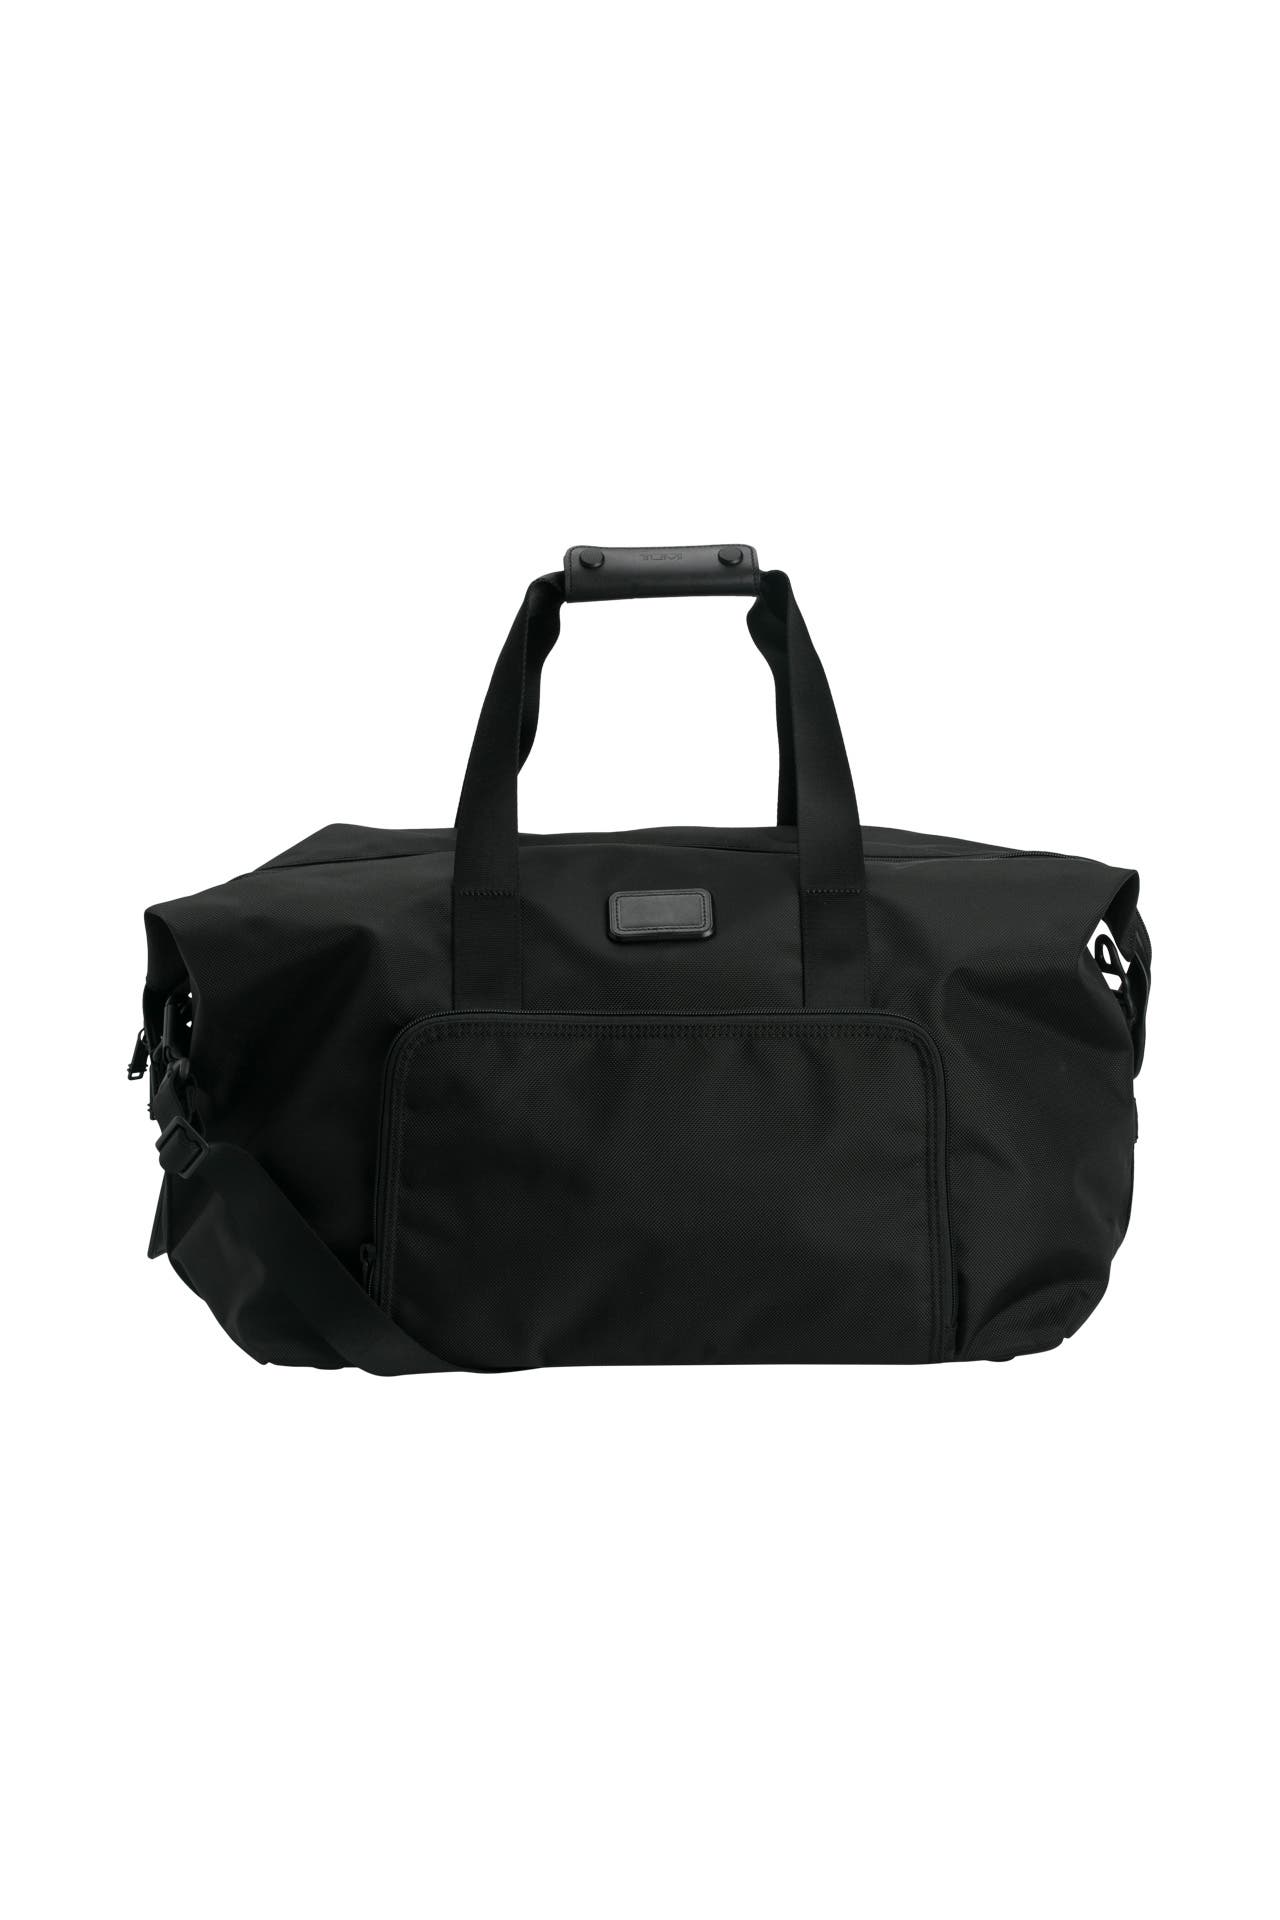 Best way to get a discount for a full priced item? Does this model ever go  on sale? : r/Tumi